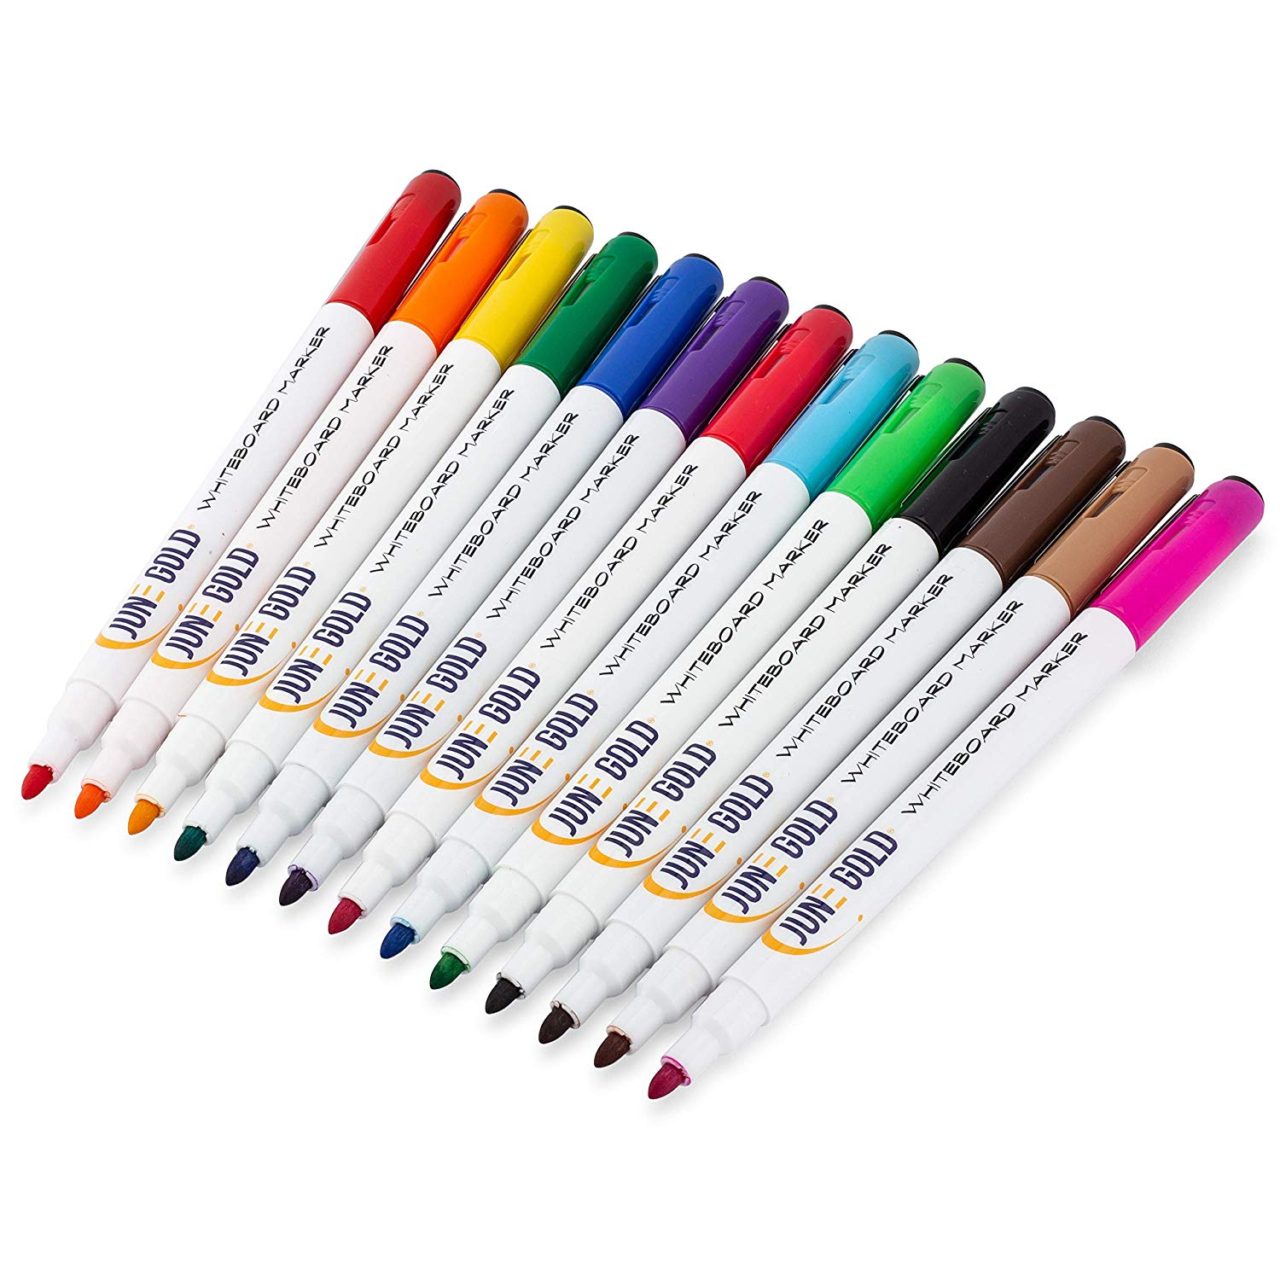 32 Pack of Assorted Colored Bullet/Fine Tip Dry Erase Markers June Gold